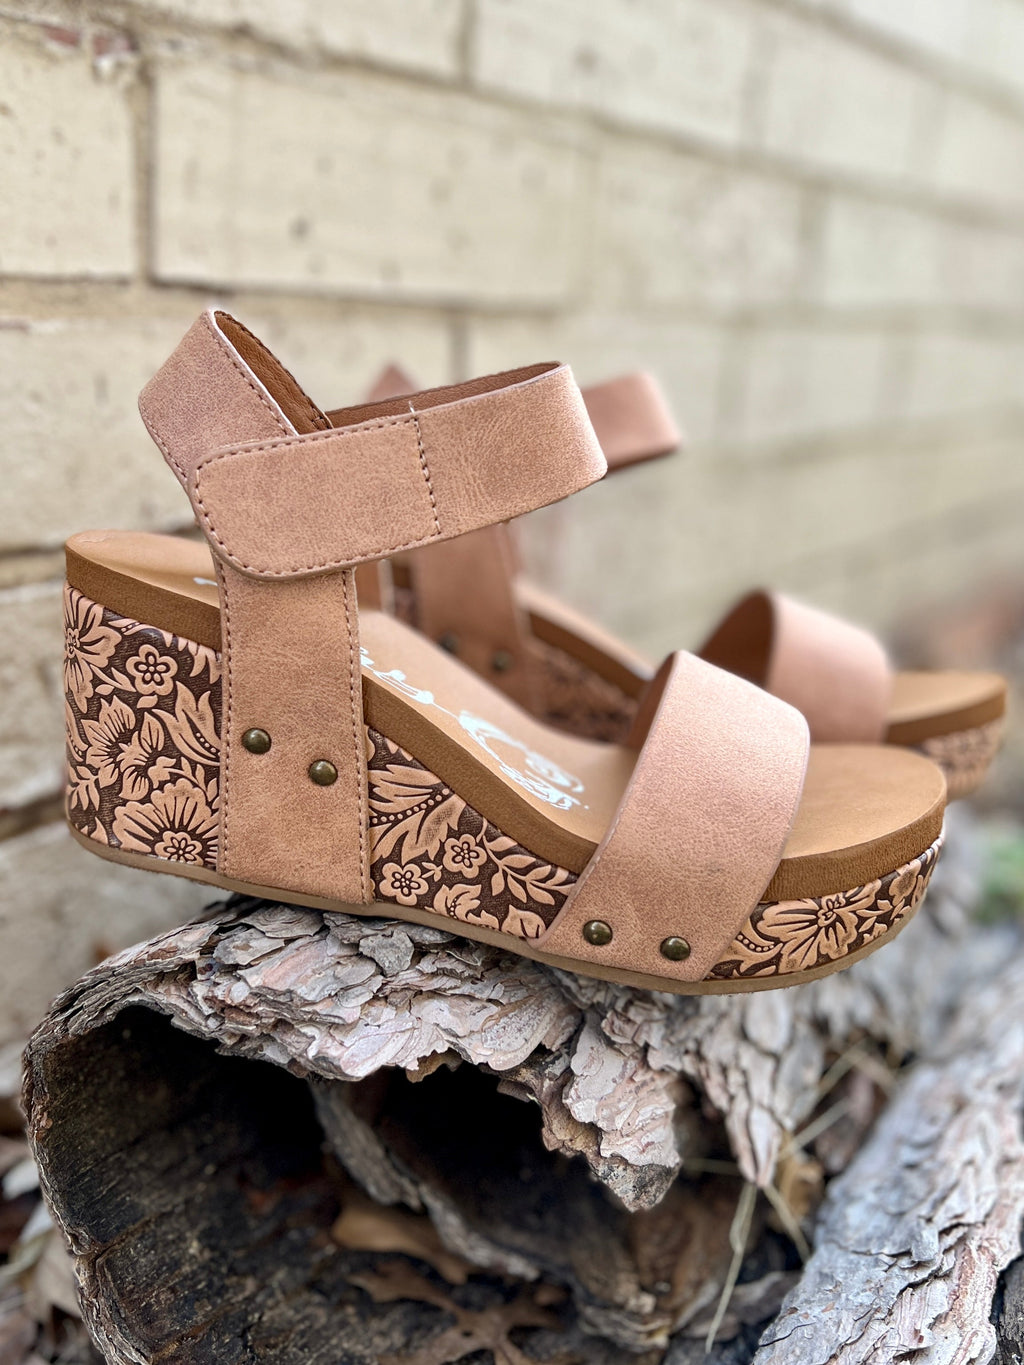 Brown platform wedge sandal. Sandals with floral wedge. Comfortable sandals. Very G sandals. Cute sandals. Neutral sandals. Boutique. Small business. Woman owned.